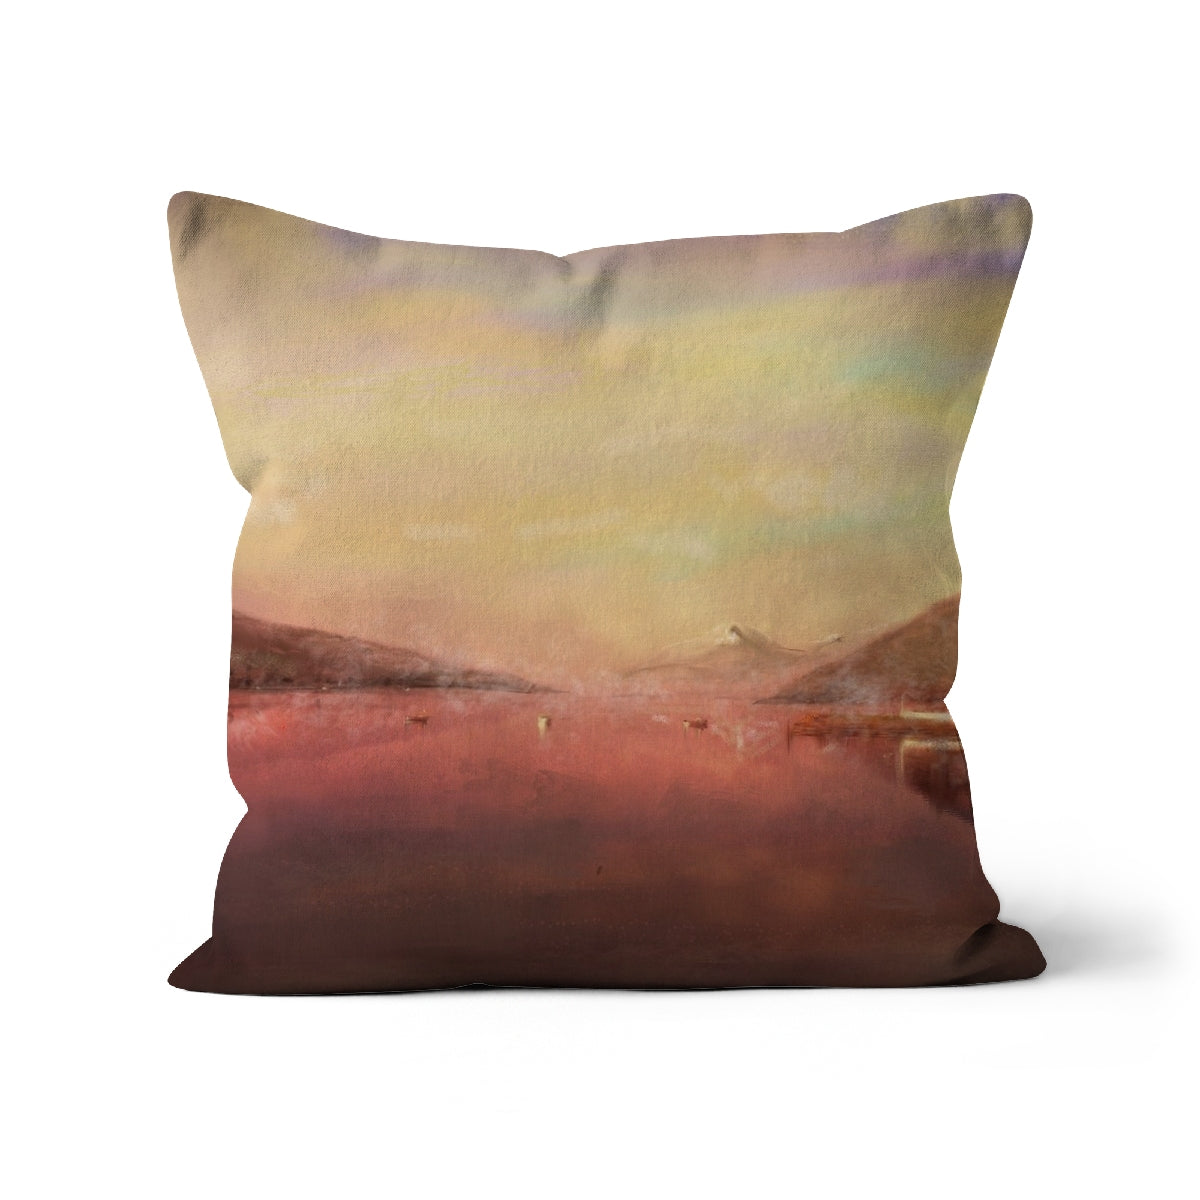 Loch Tay Art Gifts Cushion-Cushions-Scottish Lochs & Mountains Art Gallery-Canvas-12"x12"-Paintings, Prints, Homeware, Art Gifts From Scotland By Scottish Artist Kevin Hunter